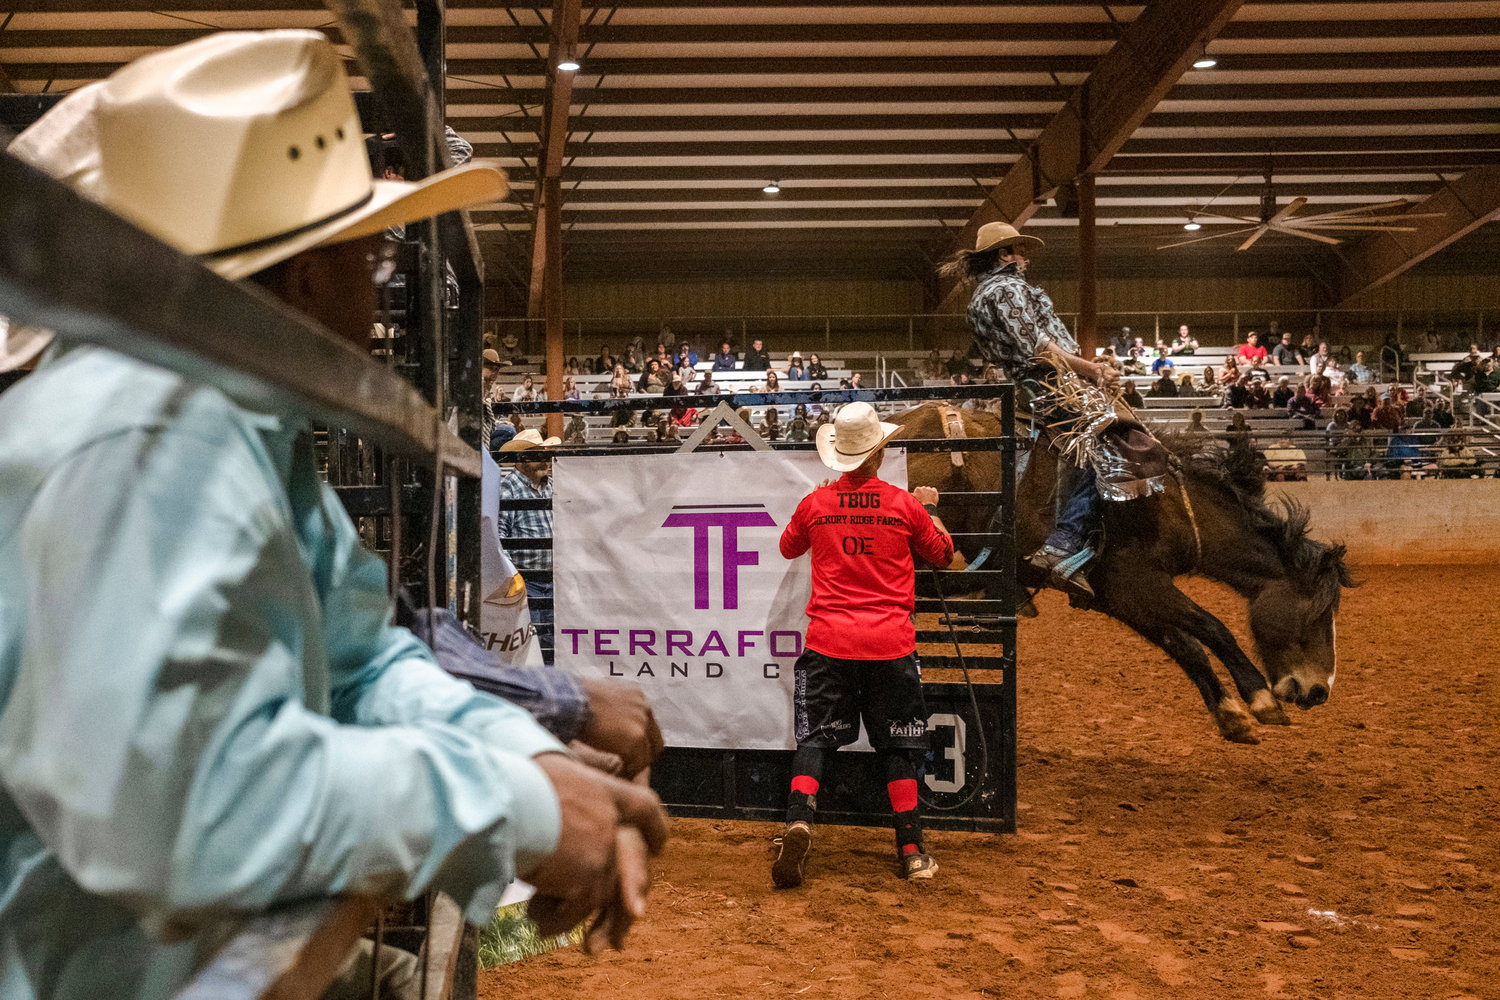 Rodeo athletes were in full swing Friday and Saturday night at the 23rd annual Robertsdale Rotary Club Rodeo, the first event of the Professional Cowboy Association’s season.